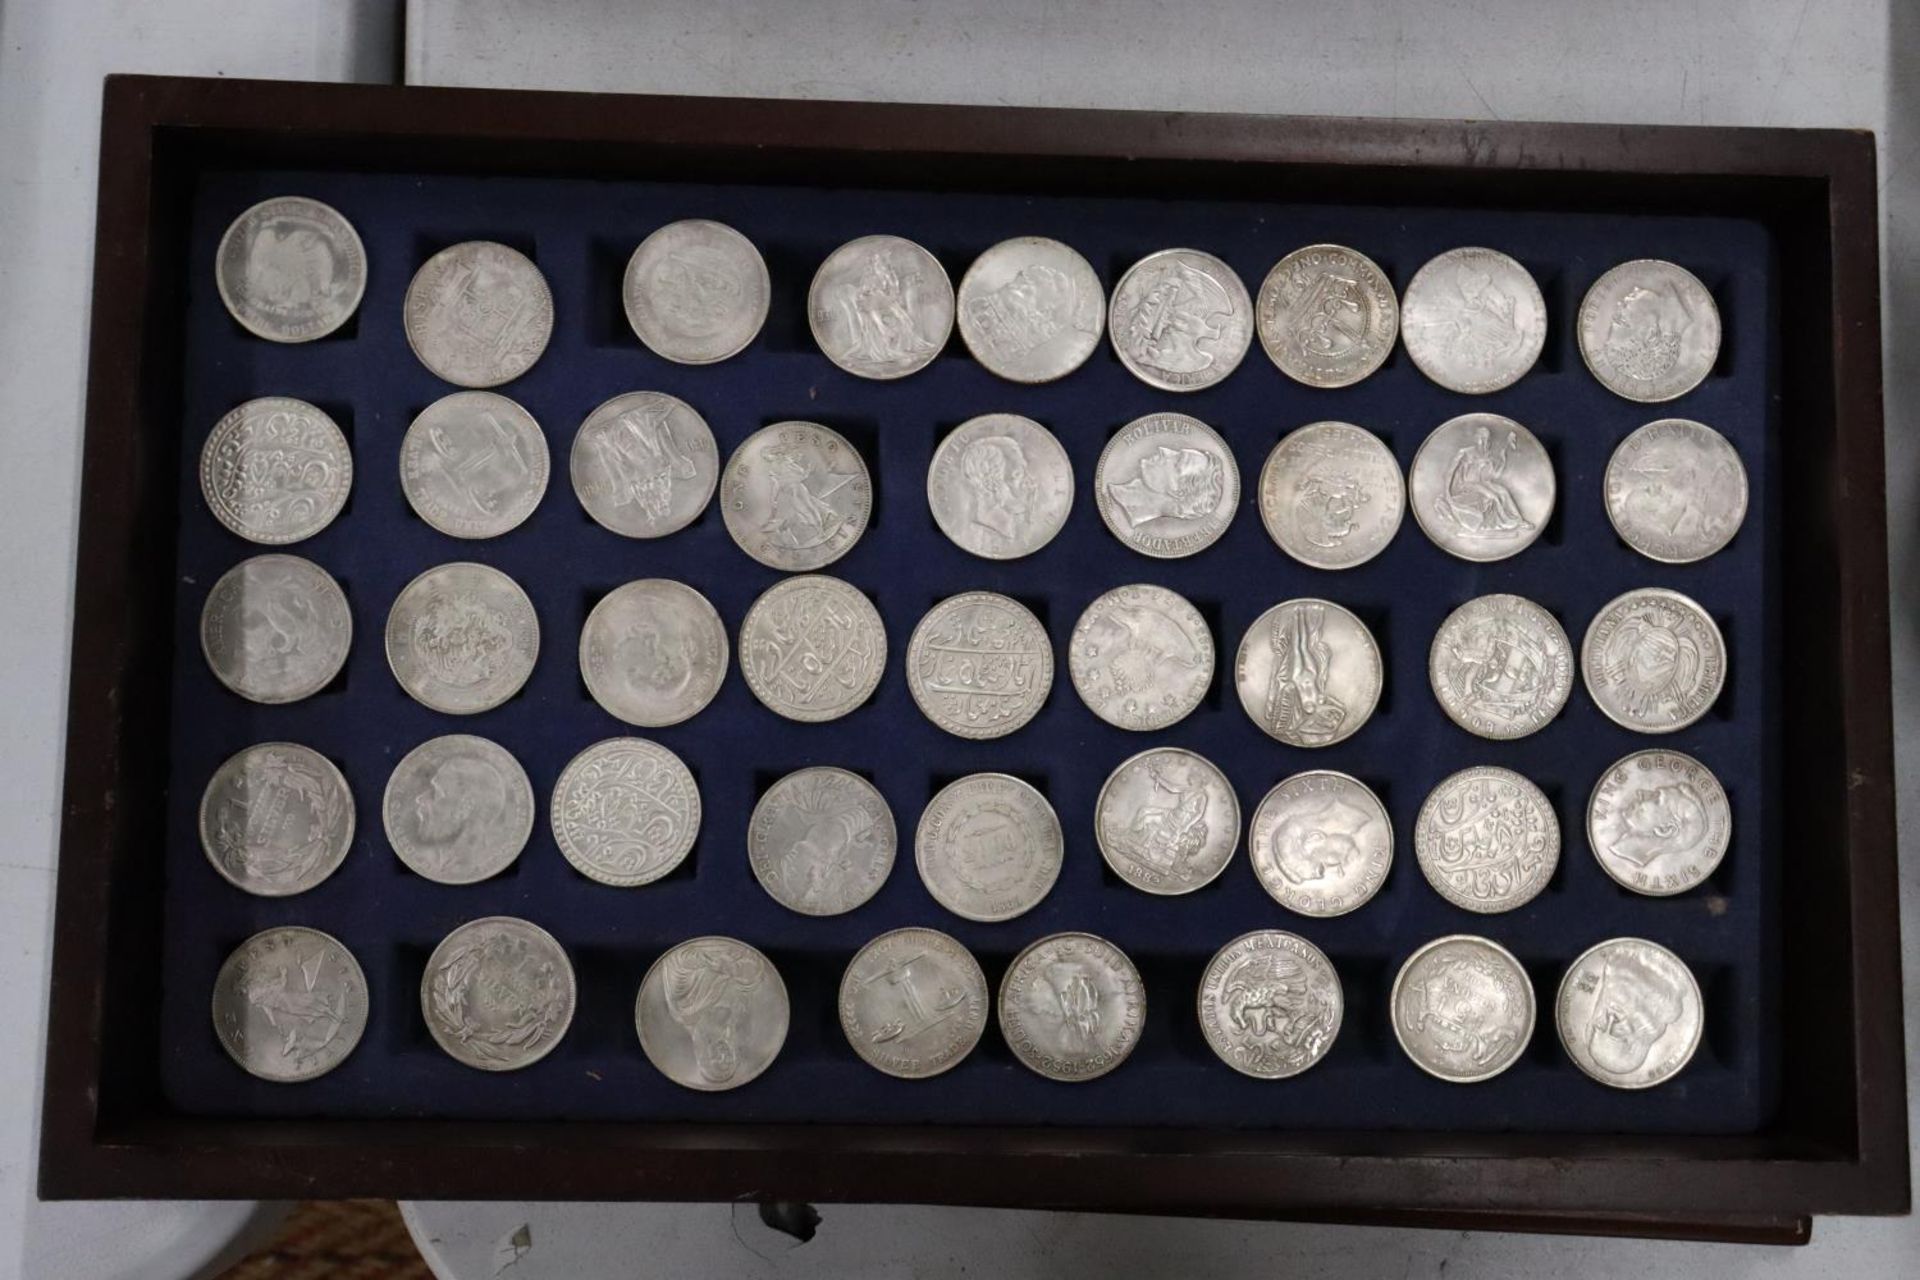 FORTY FOUR VARIOUS VINTAGE TOKENS/COINS IN A WOODEN BOX - Image 2 of 6